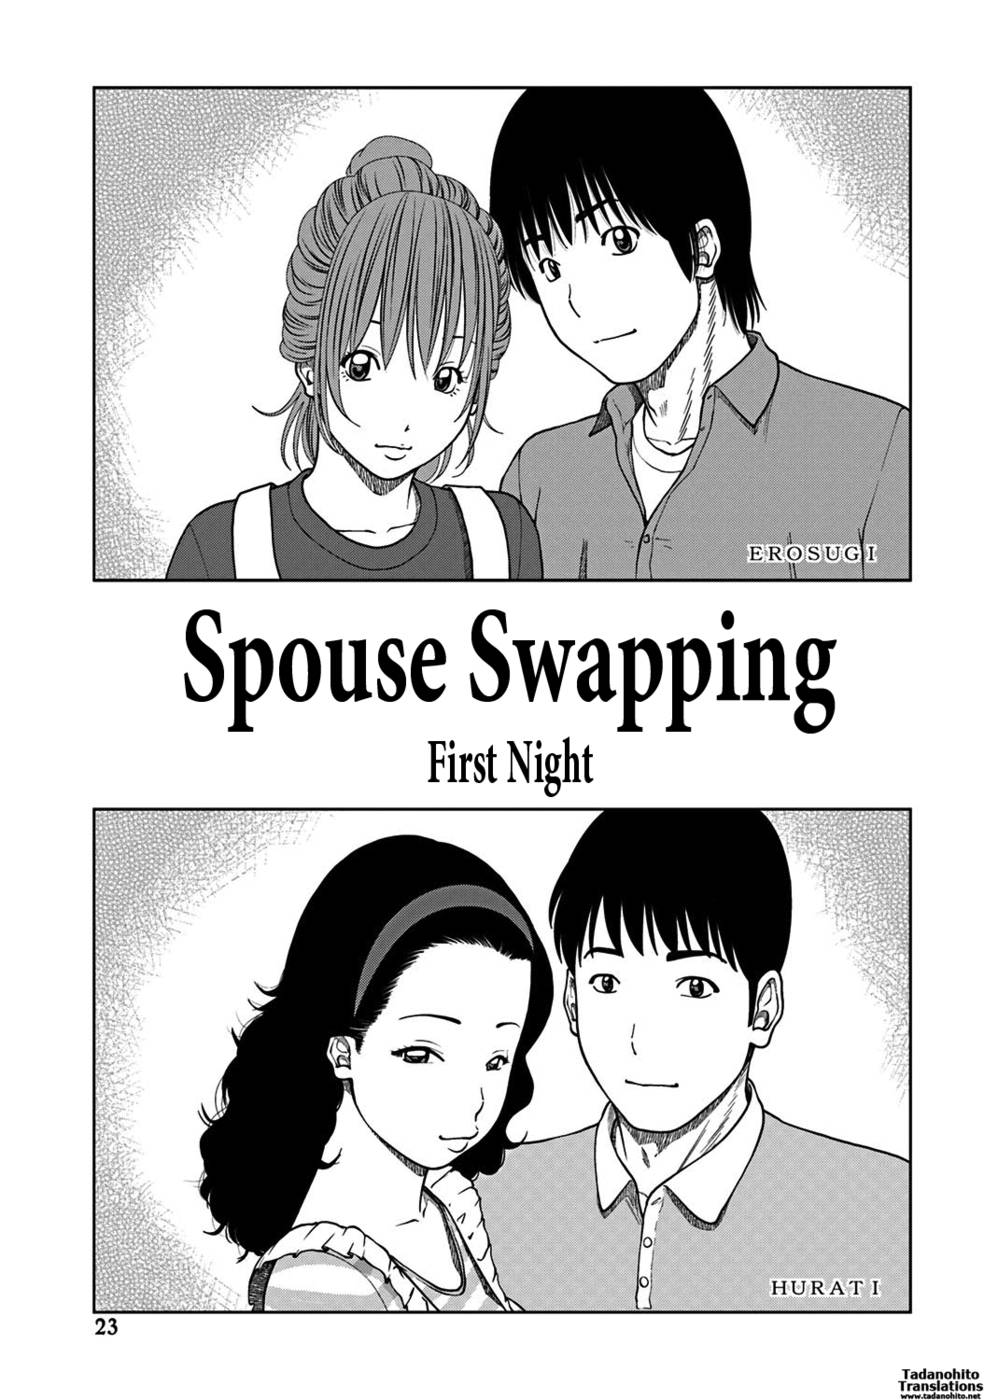 Hentai Manga Comic-33 Year Old Unsatisfied Wife-Chapter 2-Spouse Swapping-First Night-1